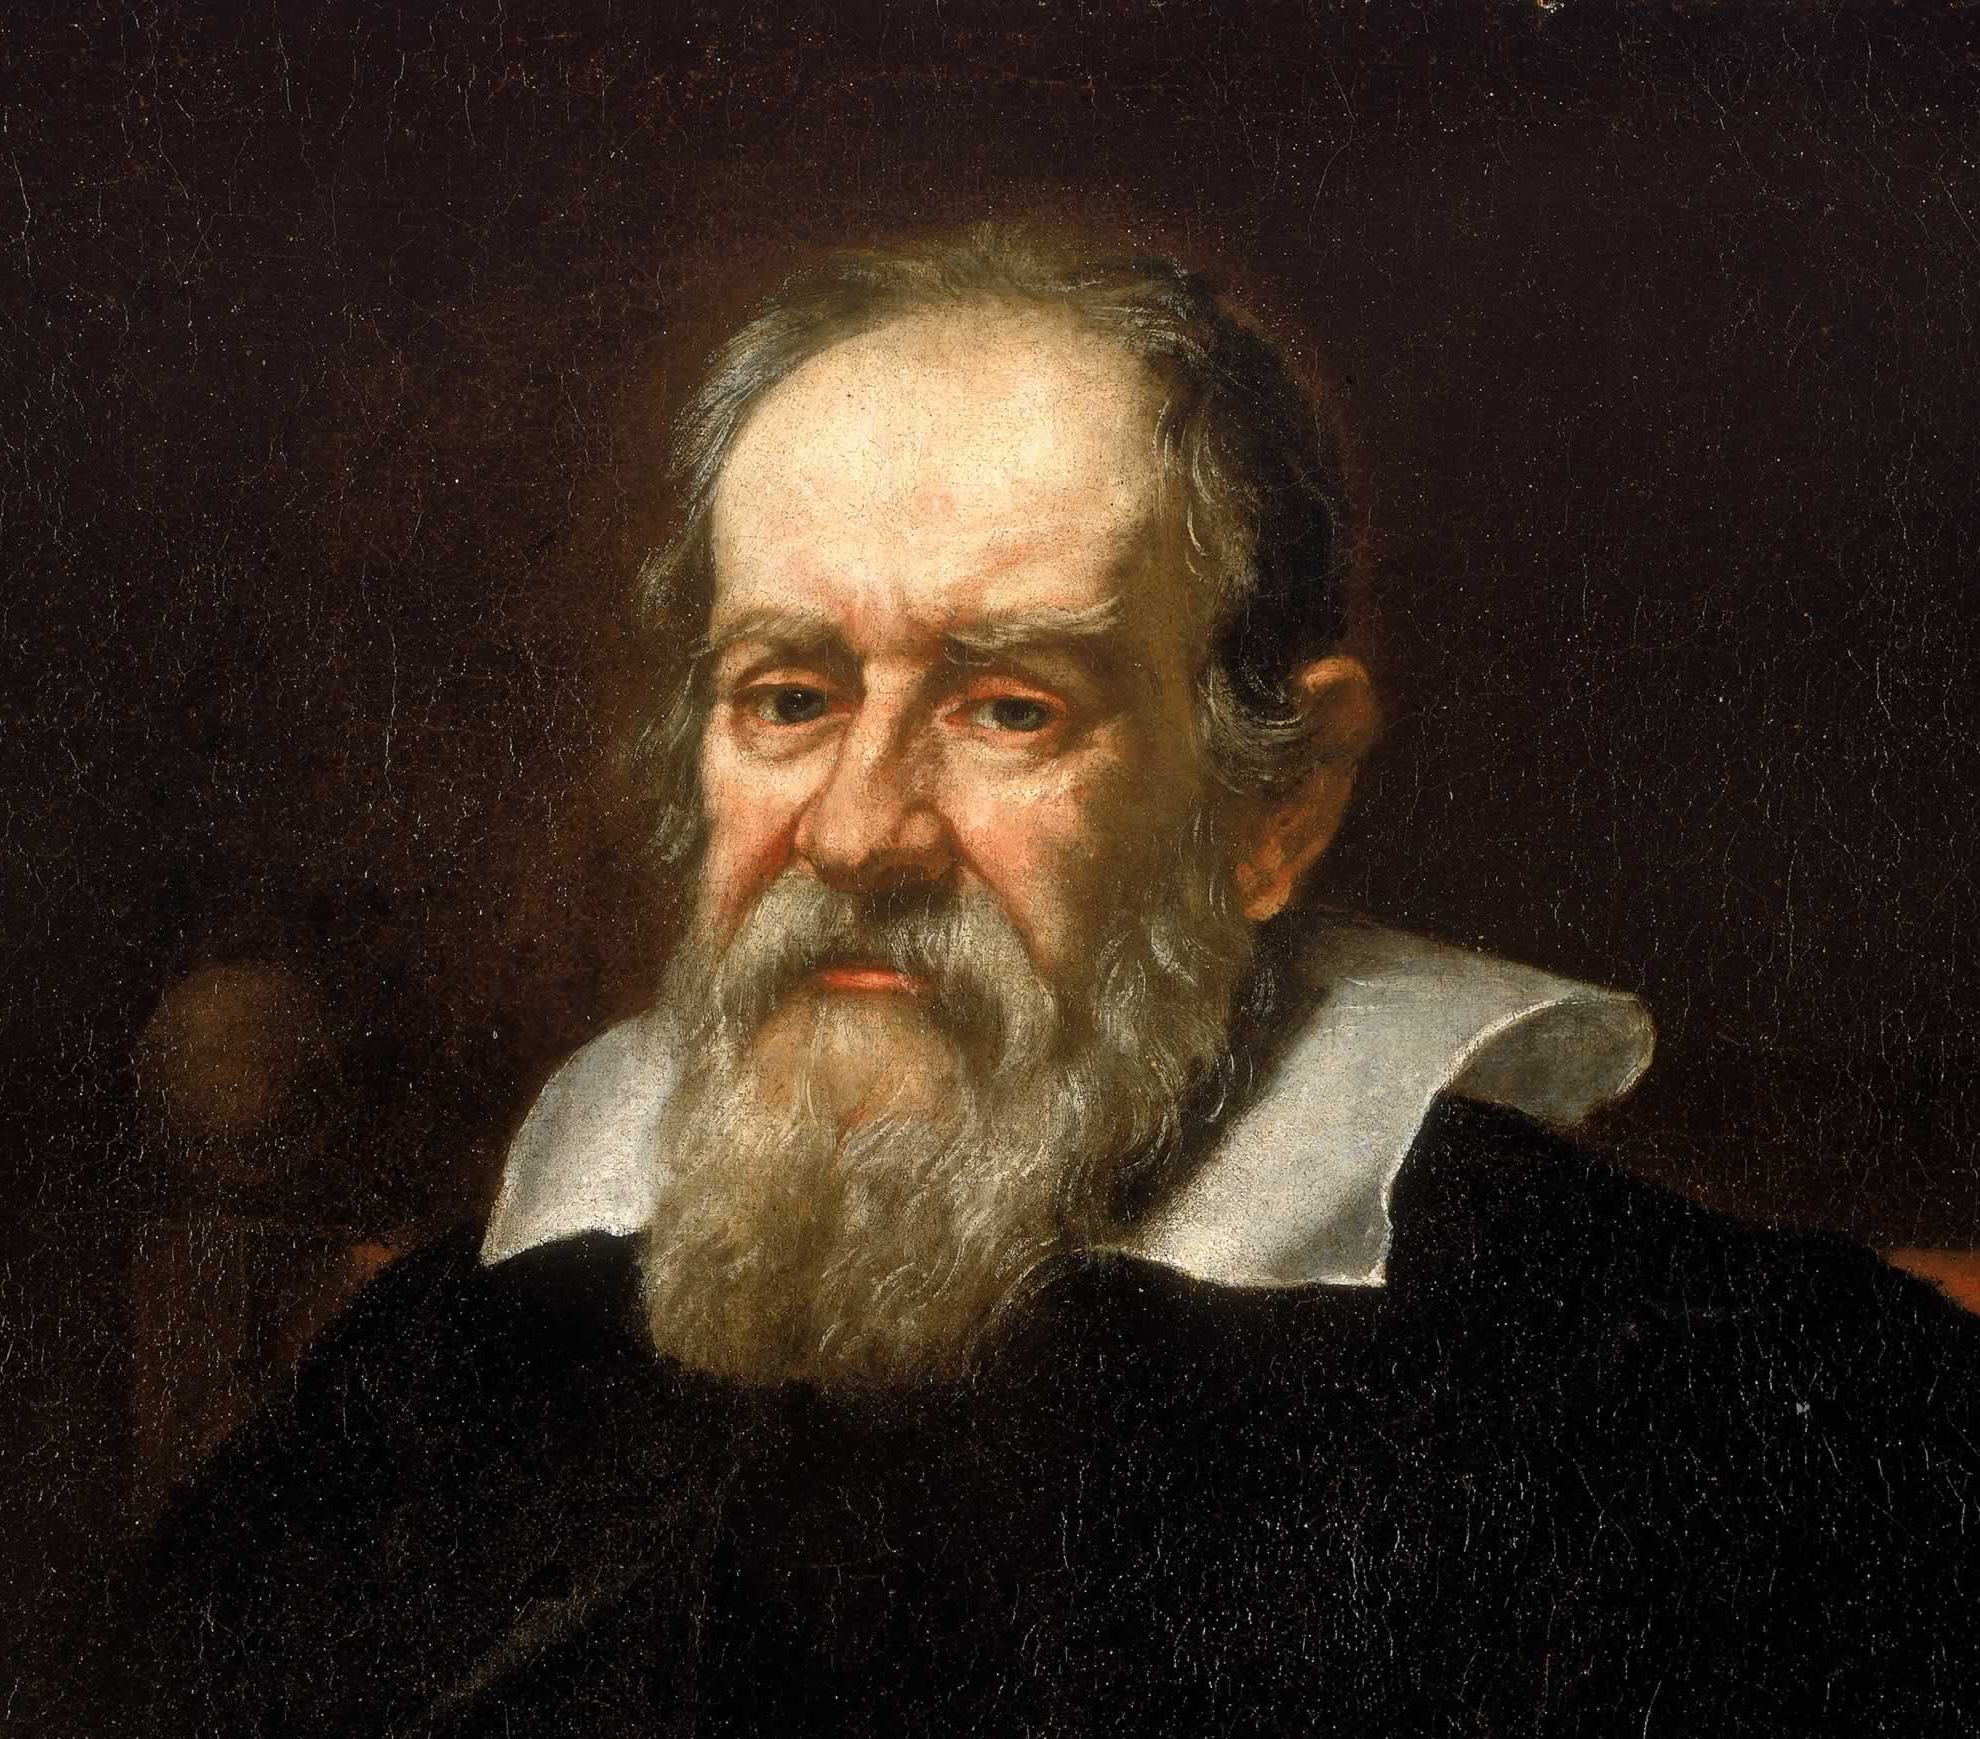 Galileo February 1564 to January 1642  was an Italian physicist, mathematician, astronomer, and philosopher who played a major role in the Scientific Revolution. His achievements include improvements to the telescope and consequent astronomical observations and support for Copernicanism. Galileo has been called the "father of modern observational astronomy"